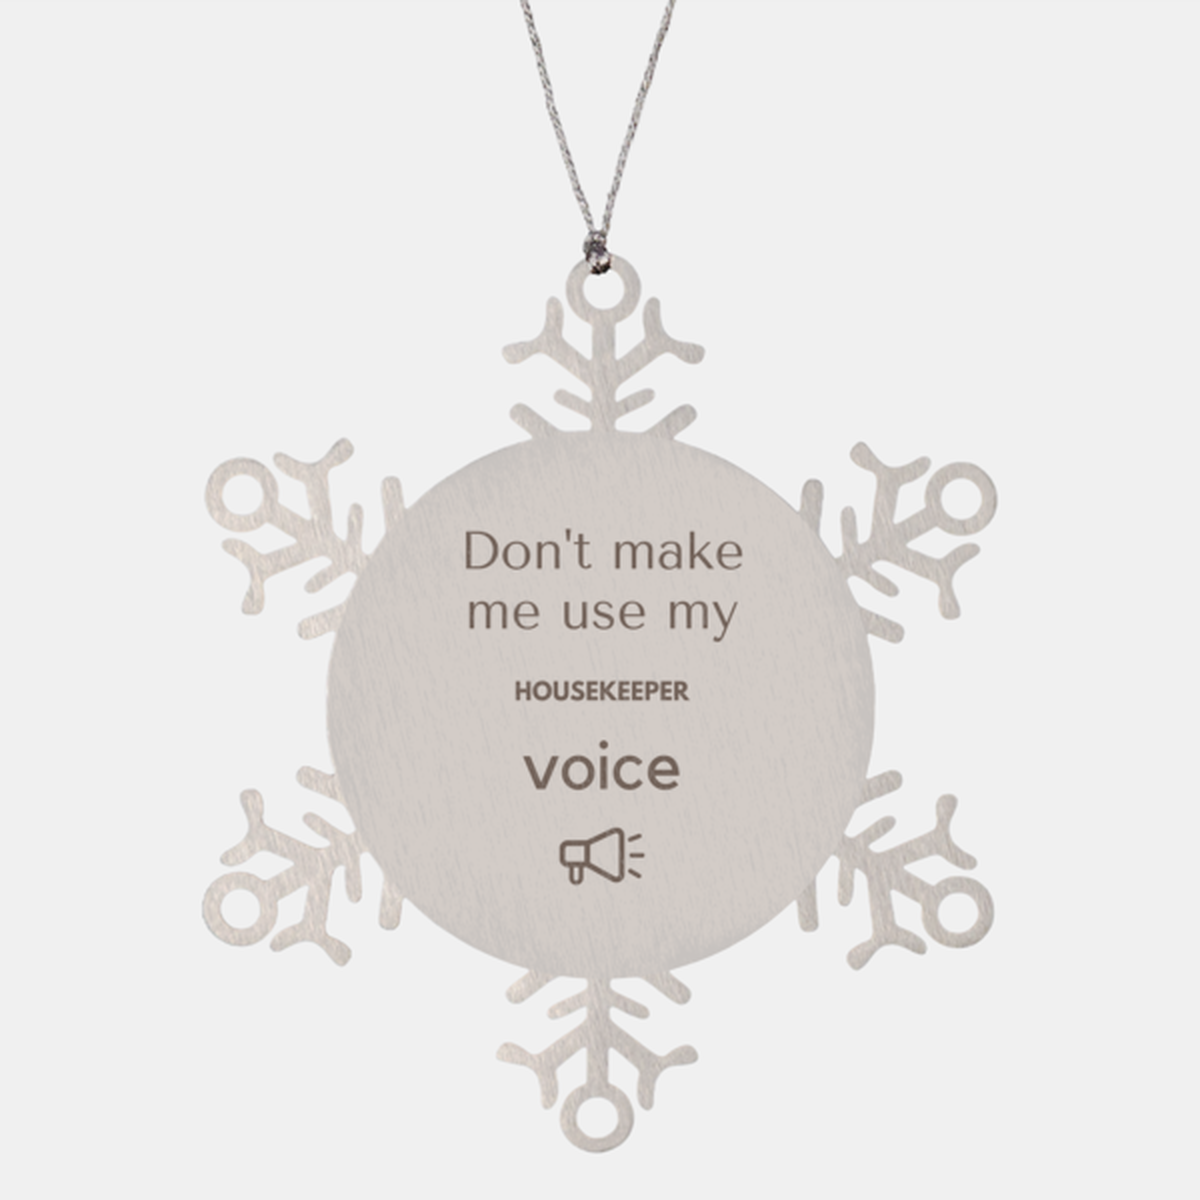 Don't make me use my Housekeeper voice, Sarcasm Housekeeper Ornament Gifts, Christmas Housekeeper Snowflake Ornament Unique Gifts For Housekeeper Coworkers, Men, Women, Colleague, Friends